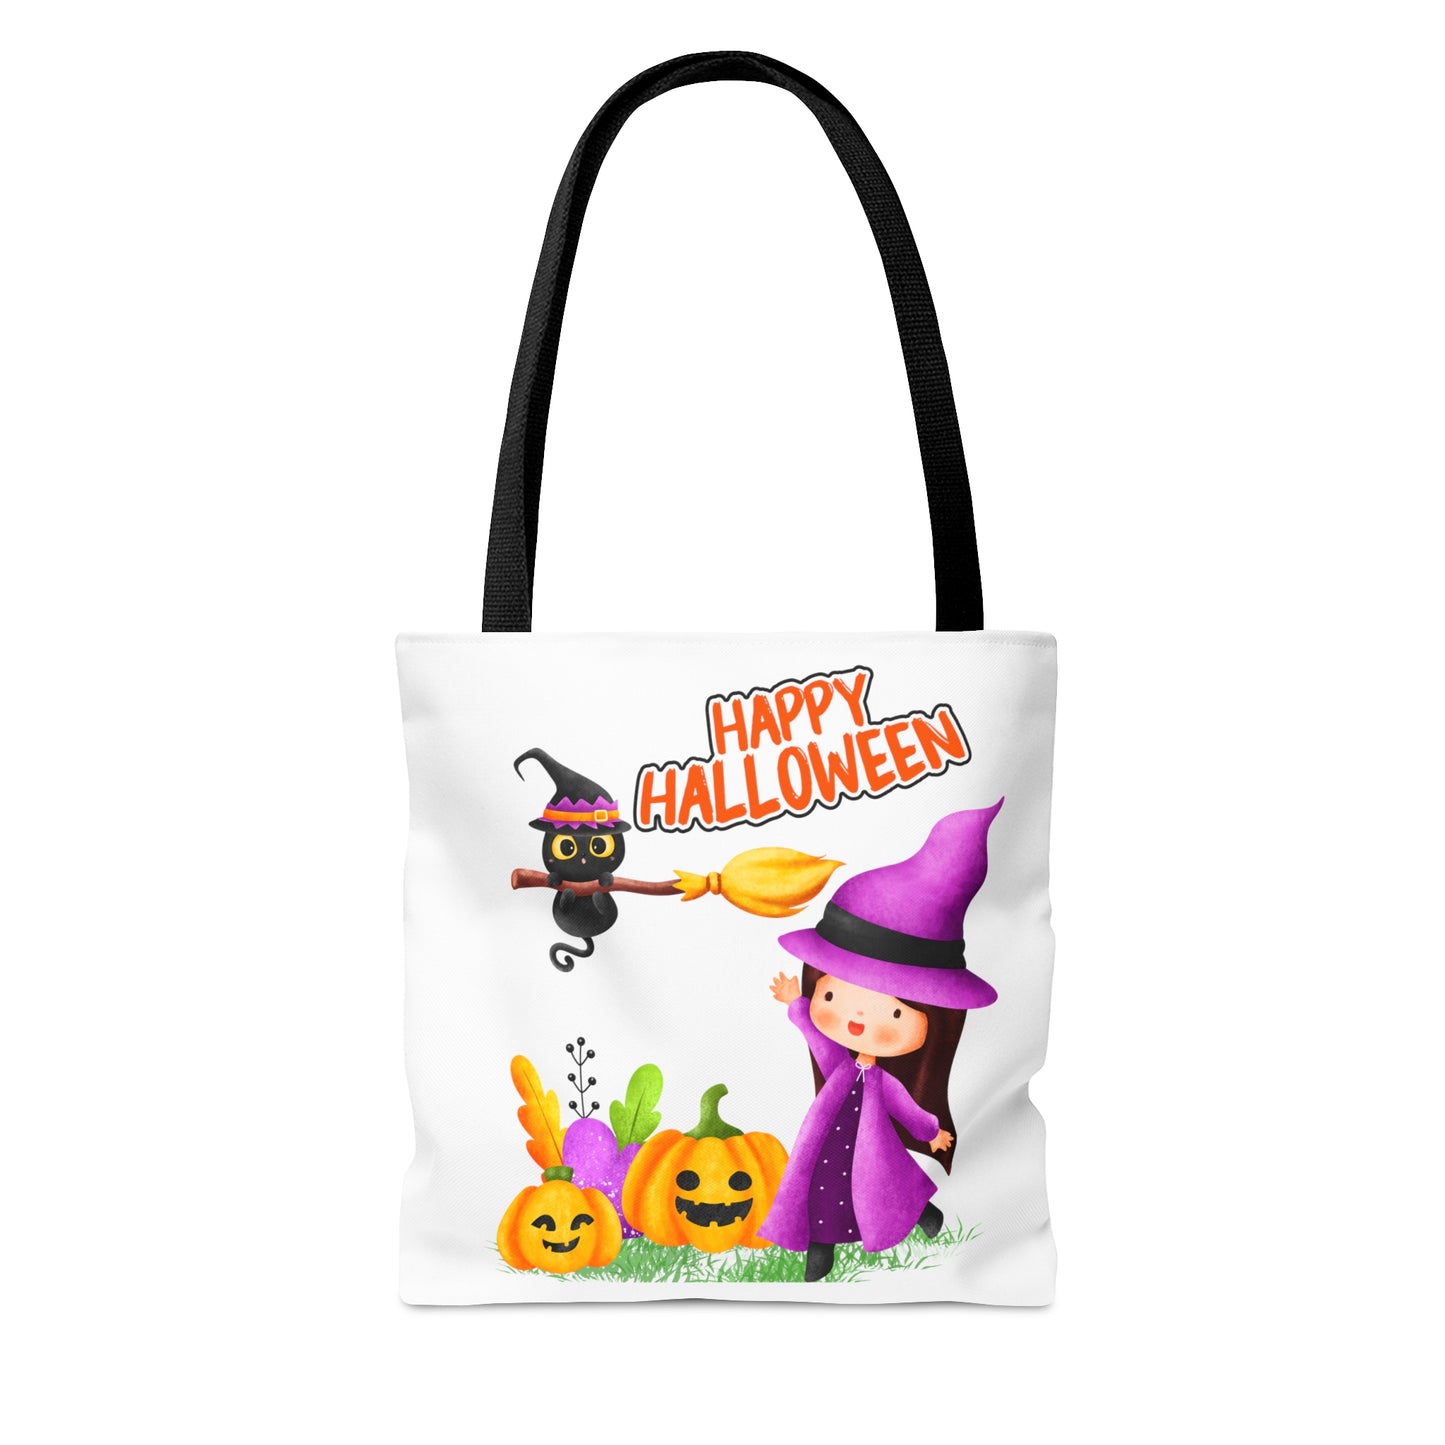 Tote Bag - Halloween - Young witch - 02